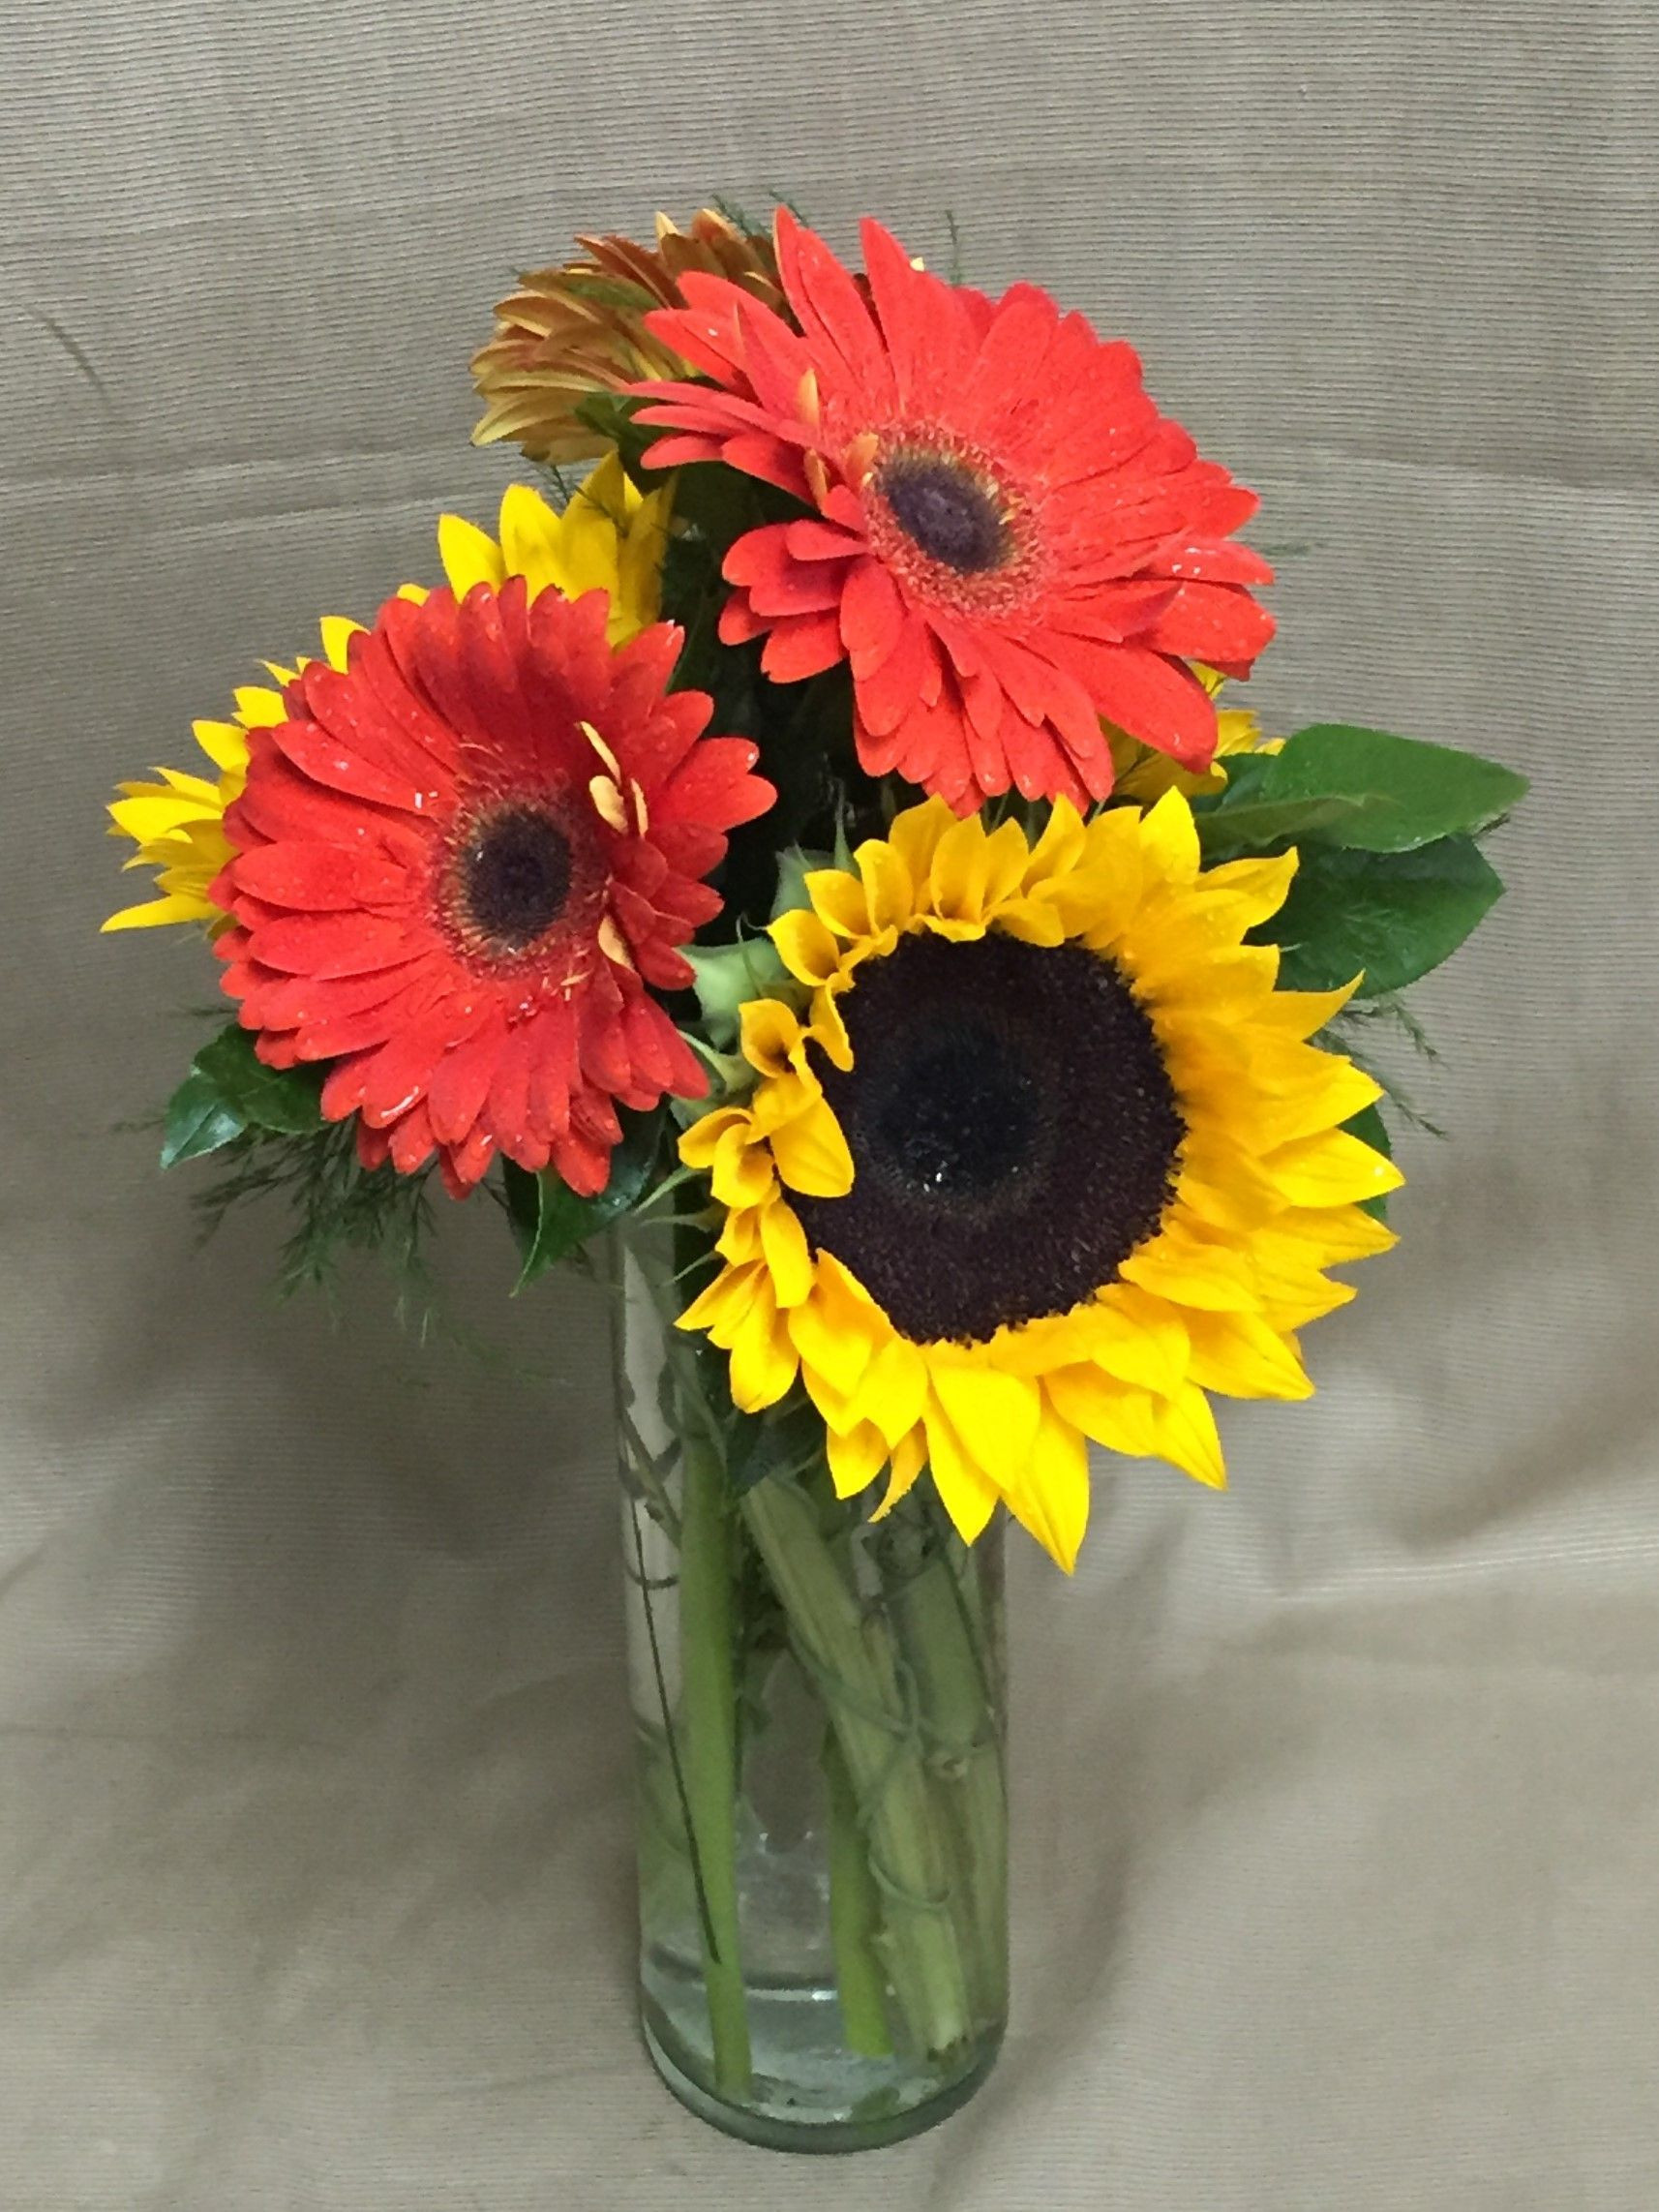 30 Great Tall Yellow Vase 2024 free download tall yellow vase of brilliant birthday yellow sunflowers orange gerbera daisies salal with regard to brilliant birthday yellow sunflowers orange gerbera daisies salal and tree fern in a tall